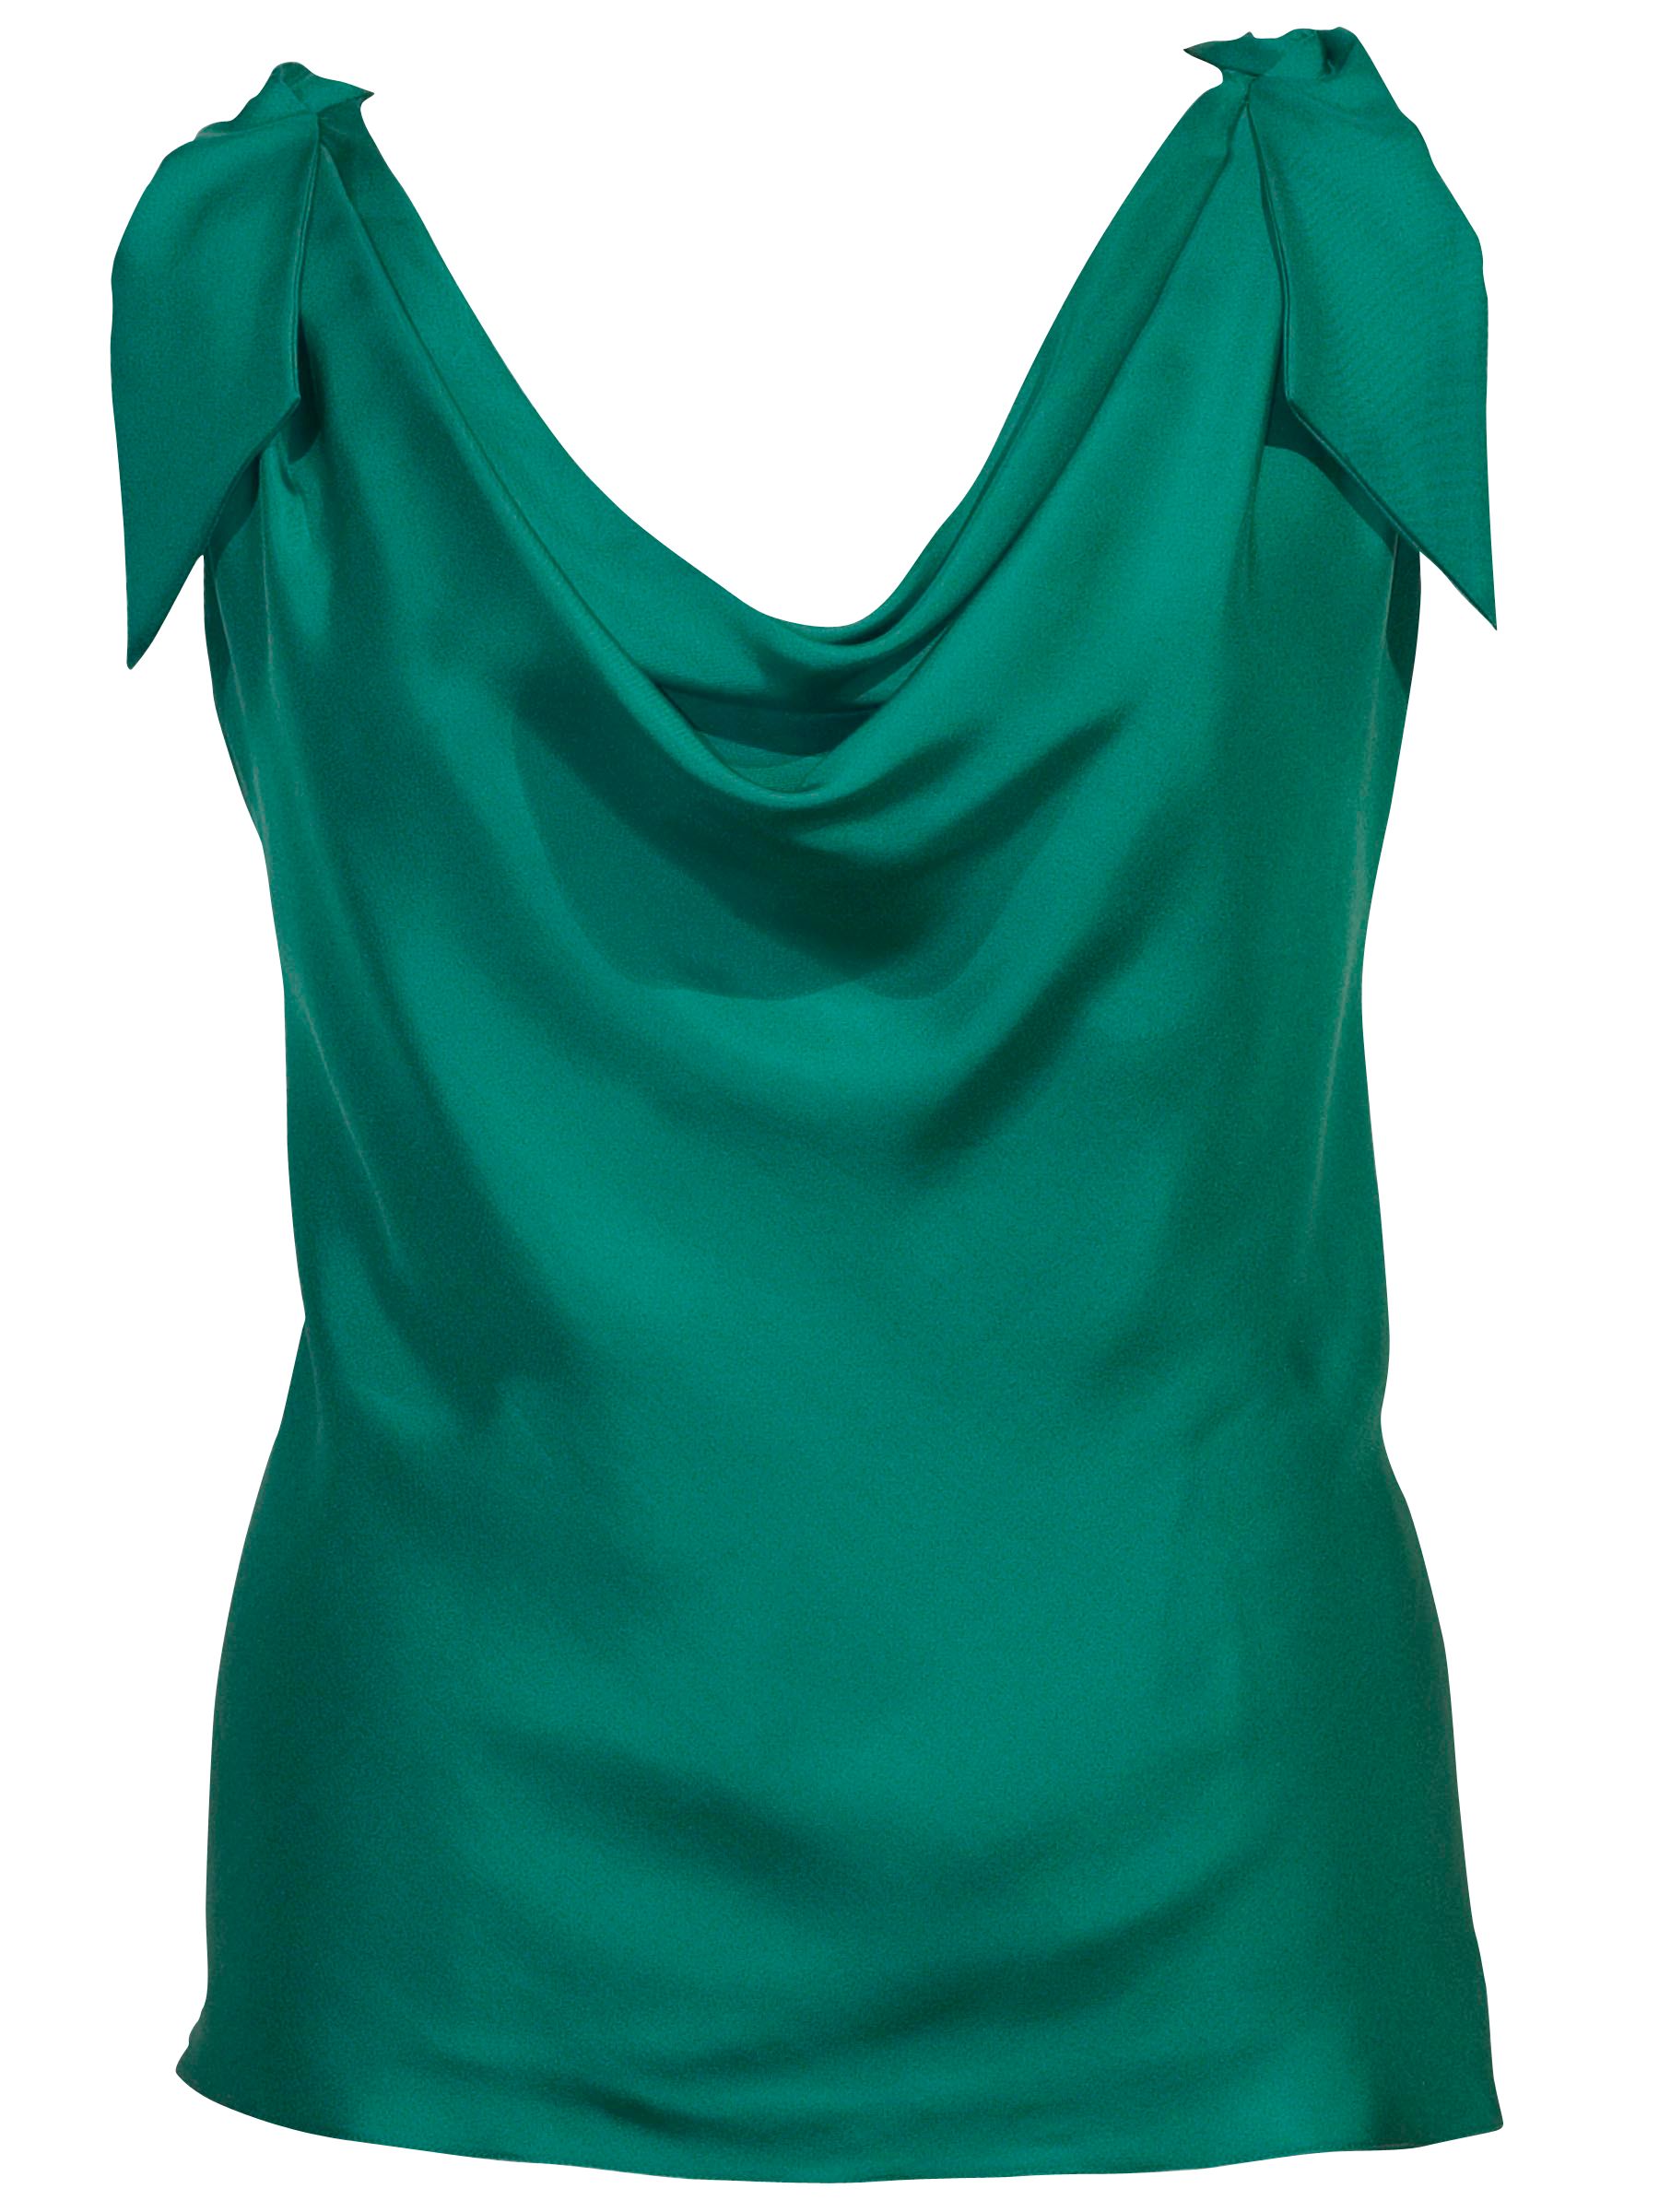 Now By Chesca Knot Shoulder Blouse, Jade